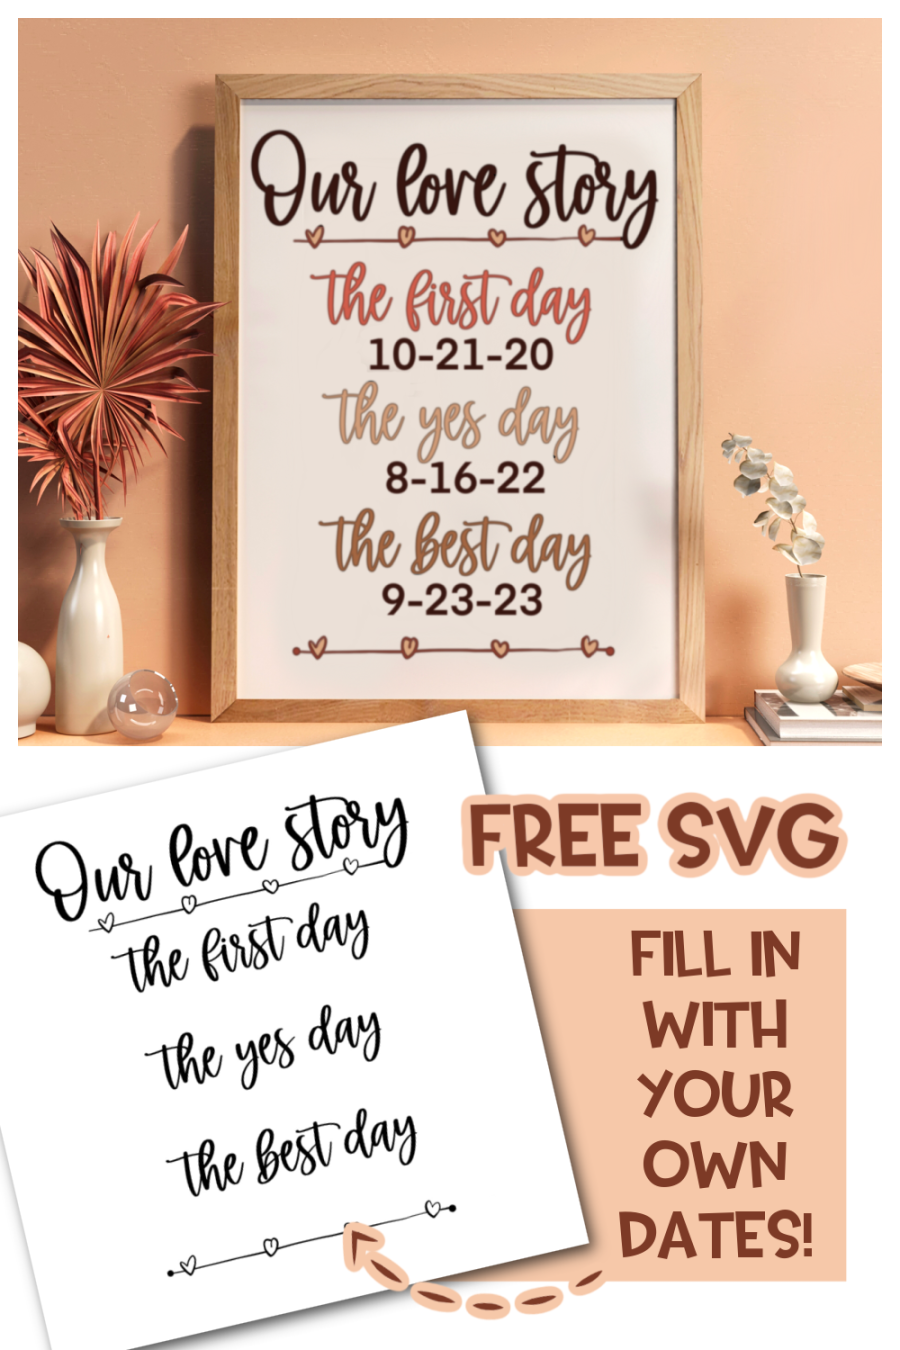 free svg wedding for personalized sign